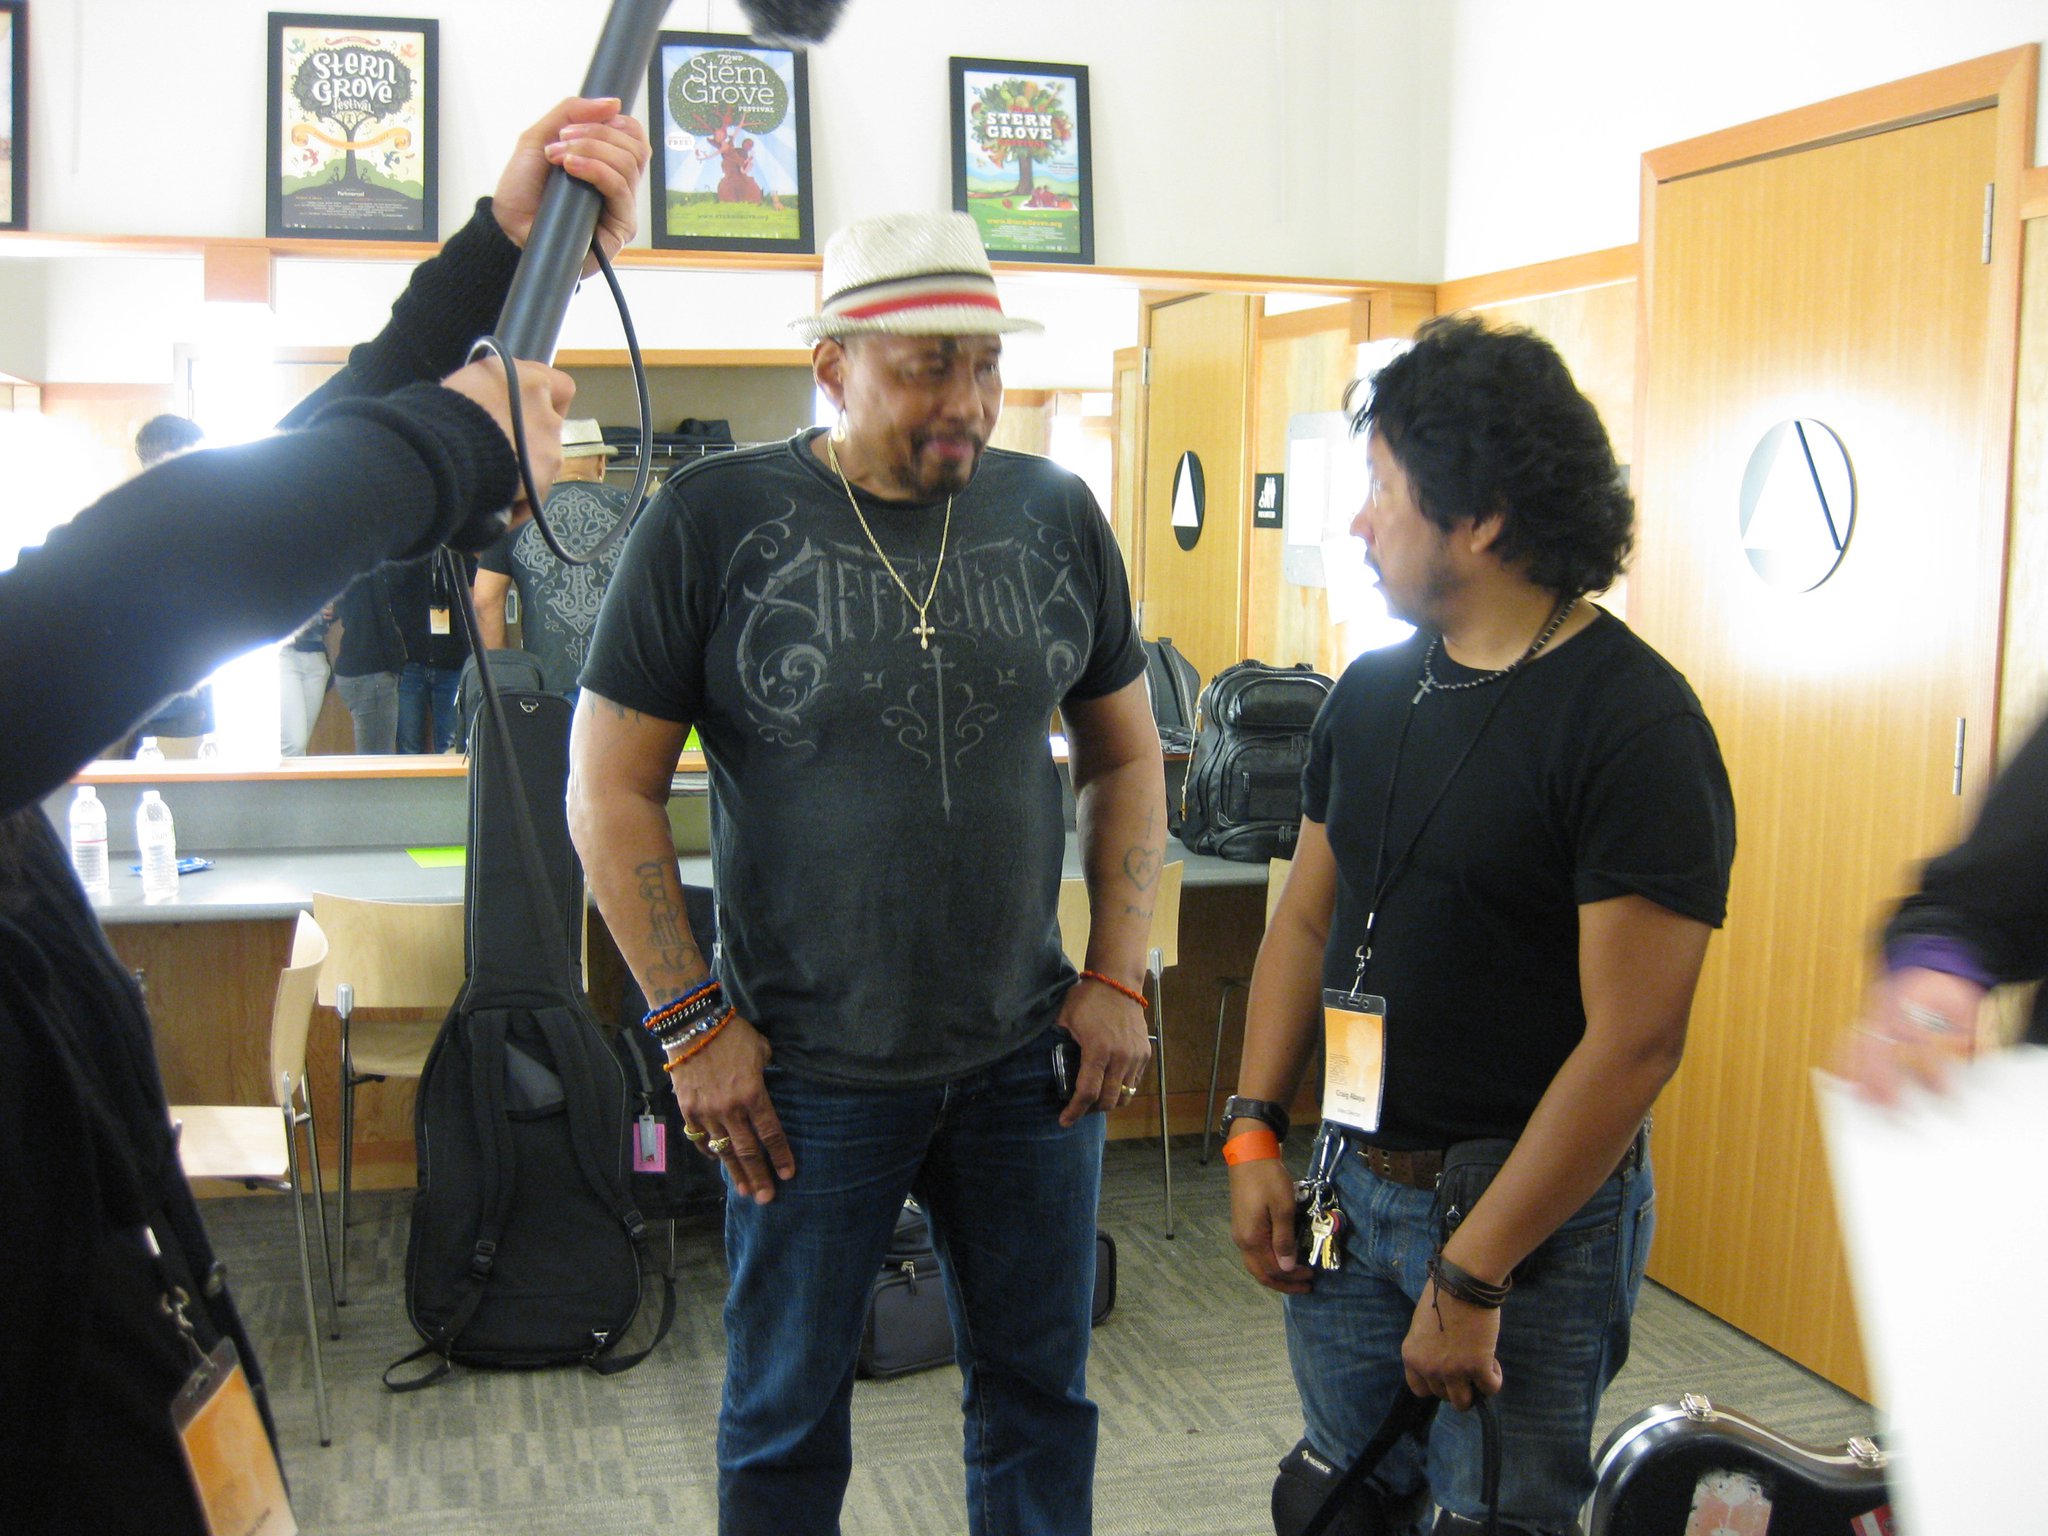 Aaron Neville and Craig Abaya preparing for the backstage interview.